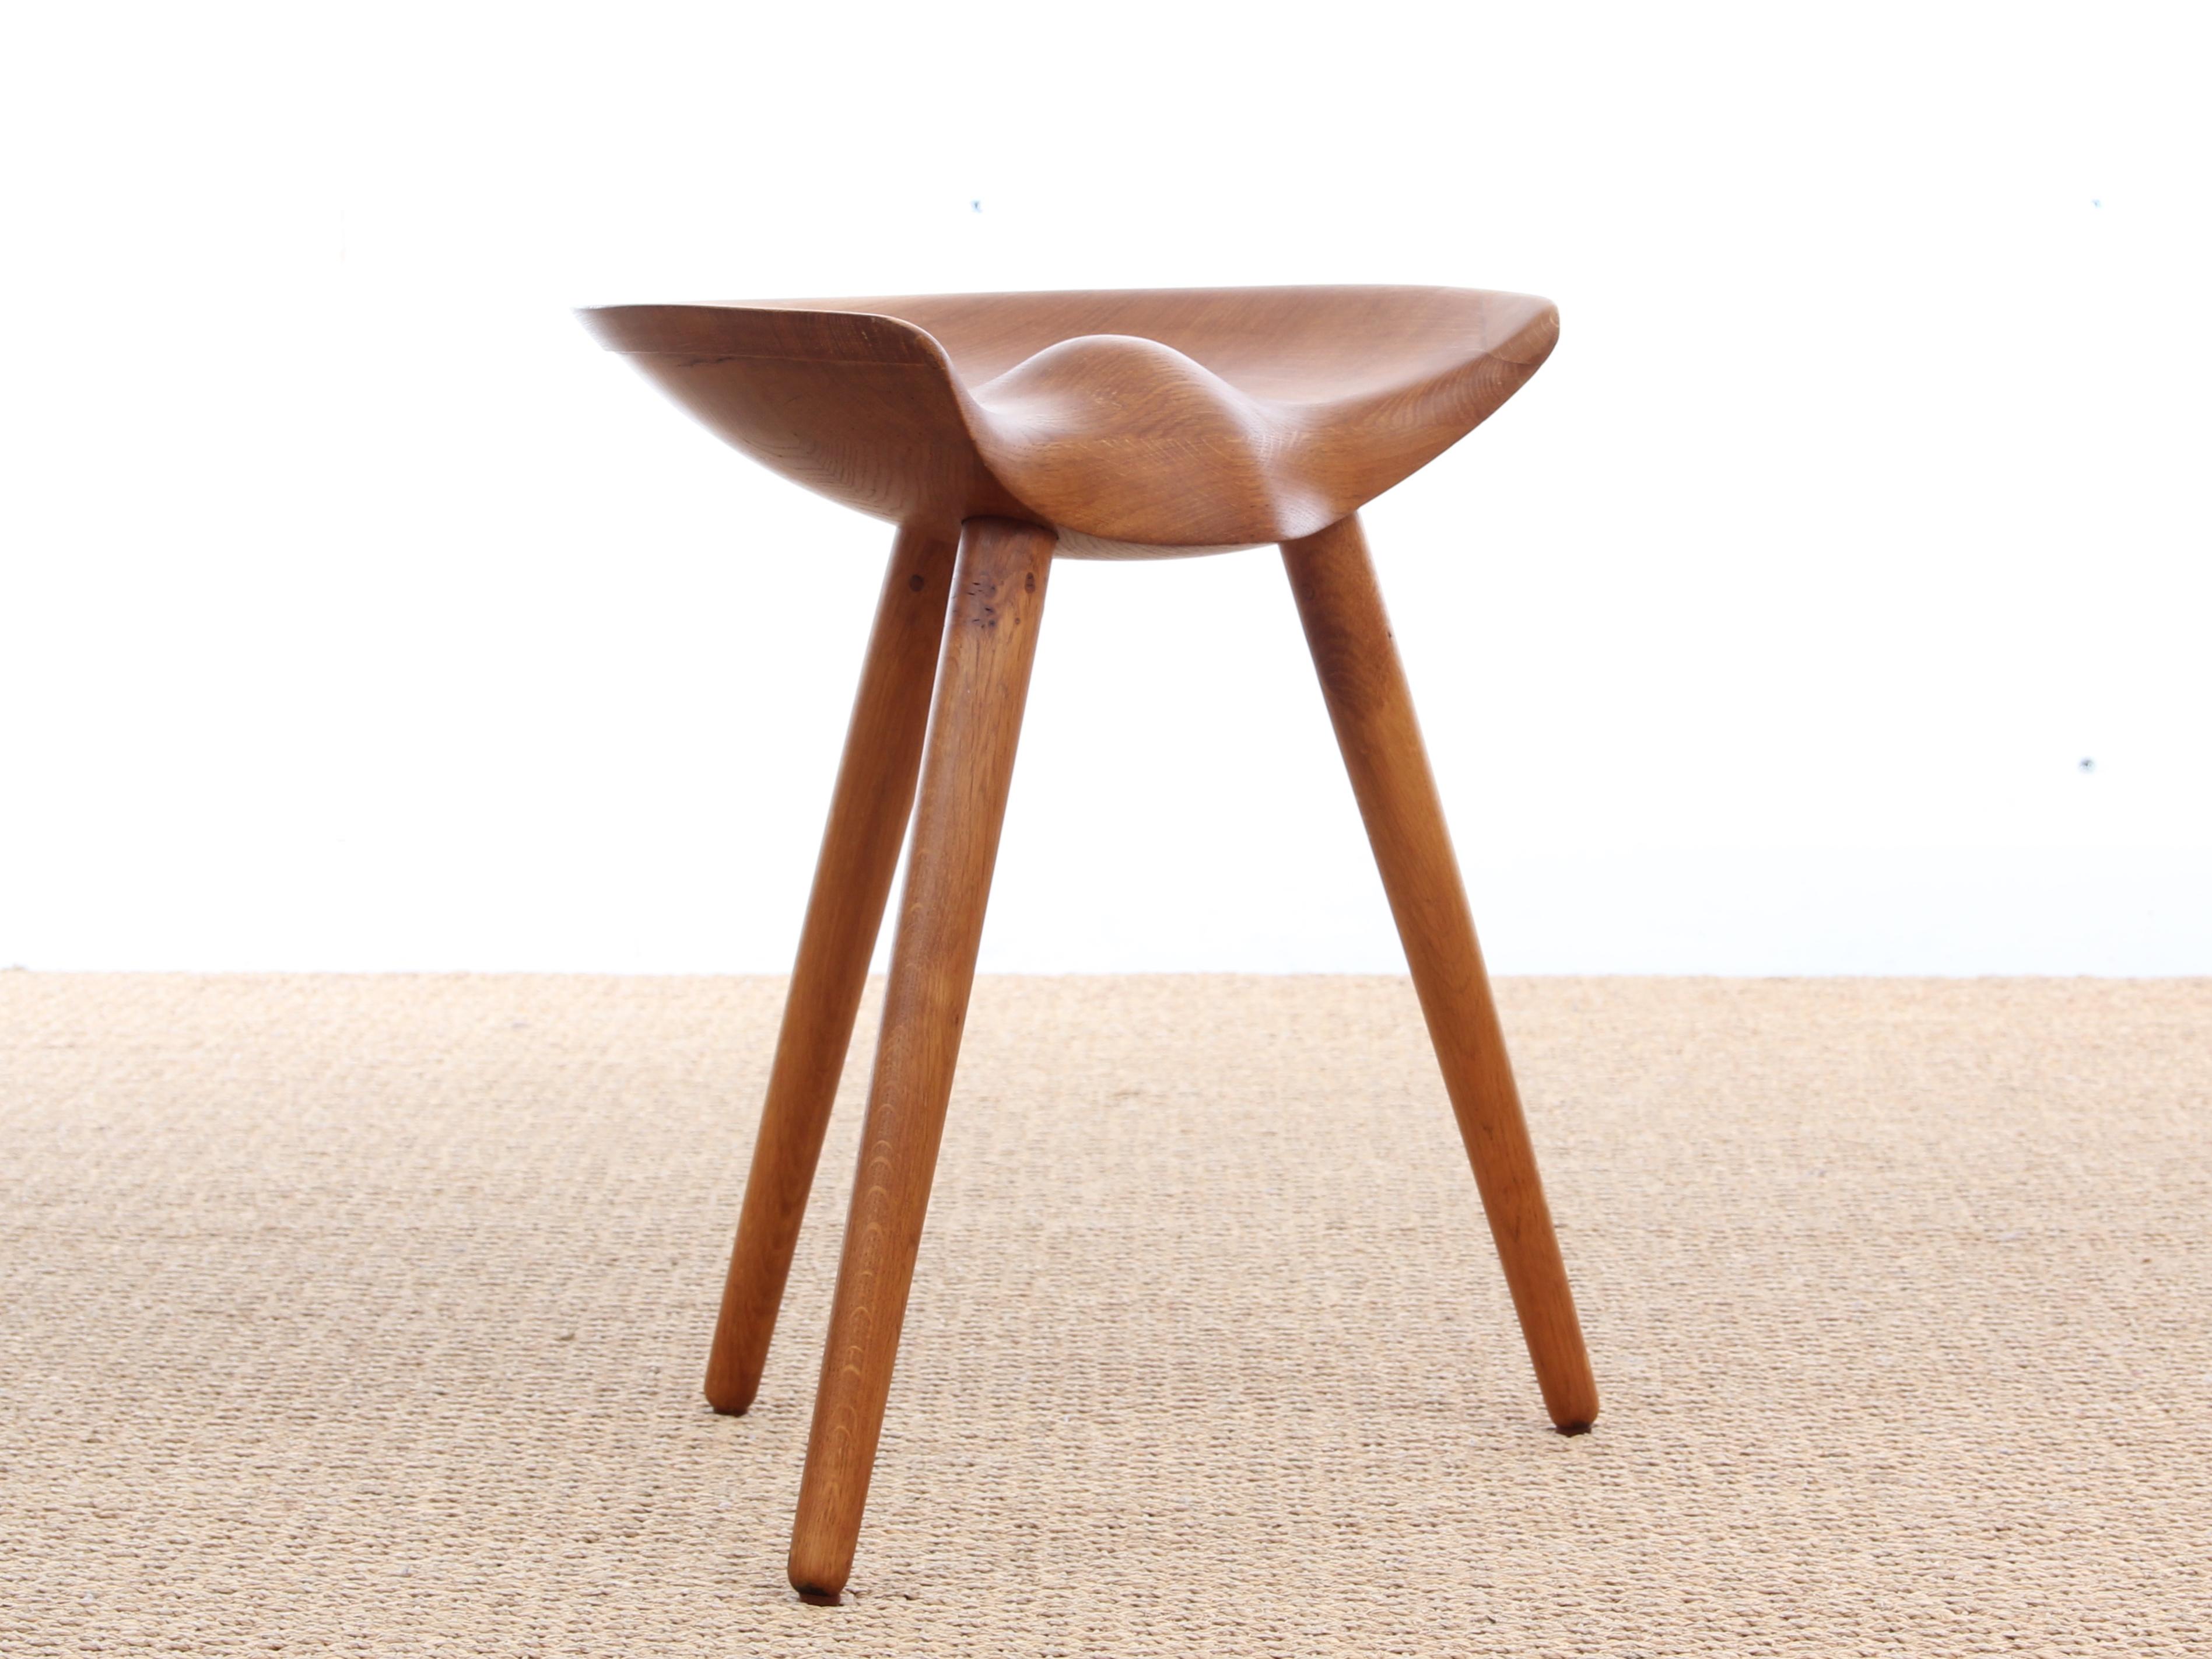 Solid oak stool by Mogens Lassen, designed in 1942. Original edition produced by K. Thomsen and labelled. Old restoration trace in the left corner. Feet devisables.

Model presented at the 